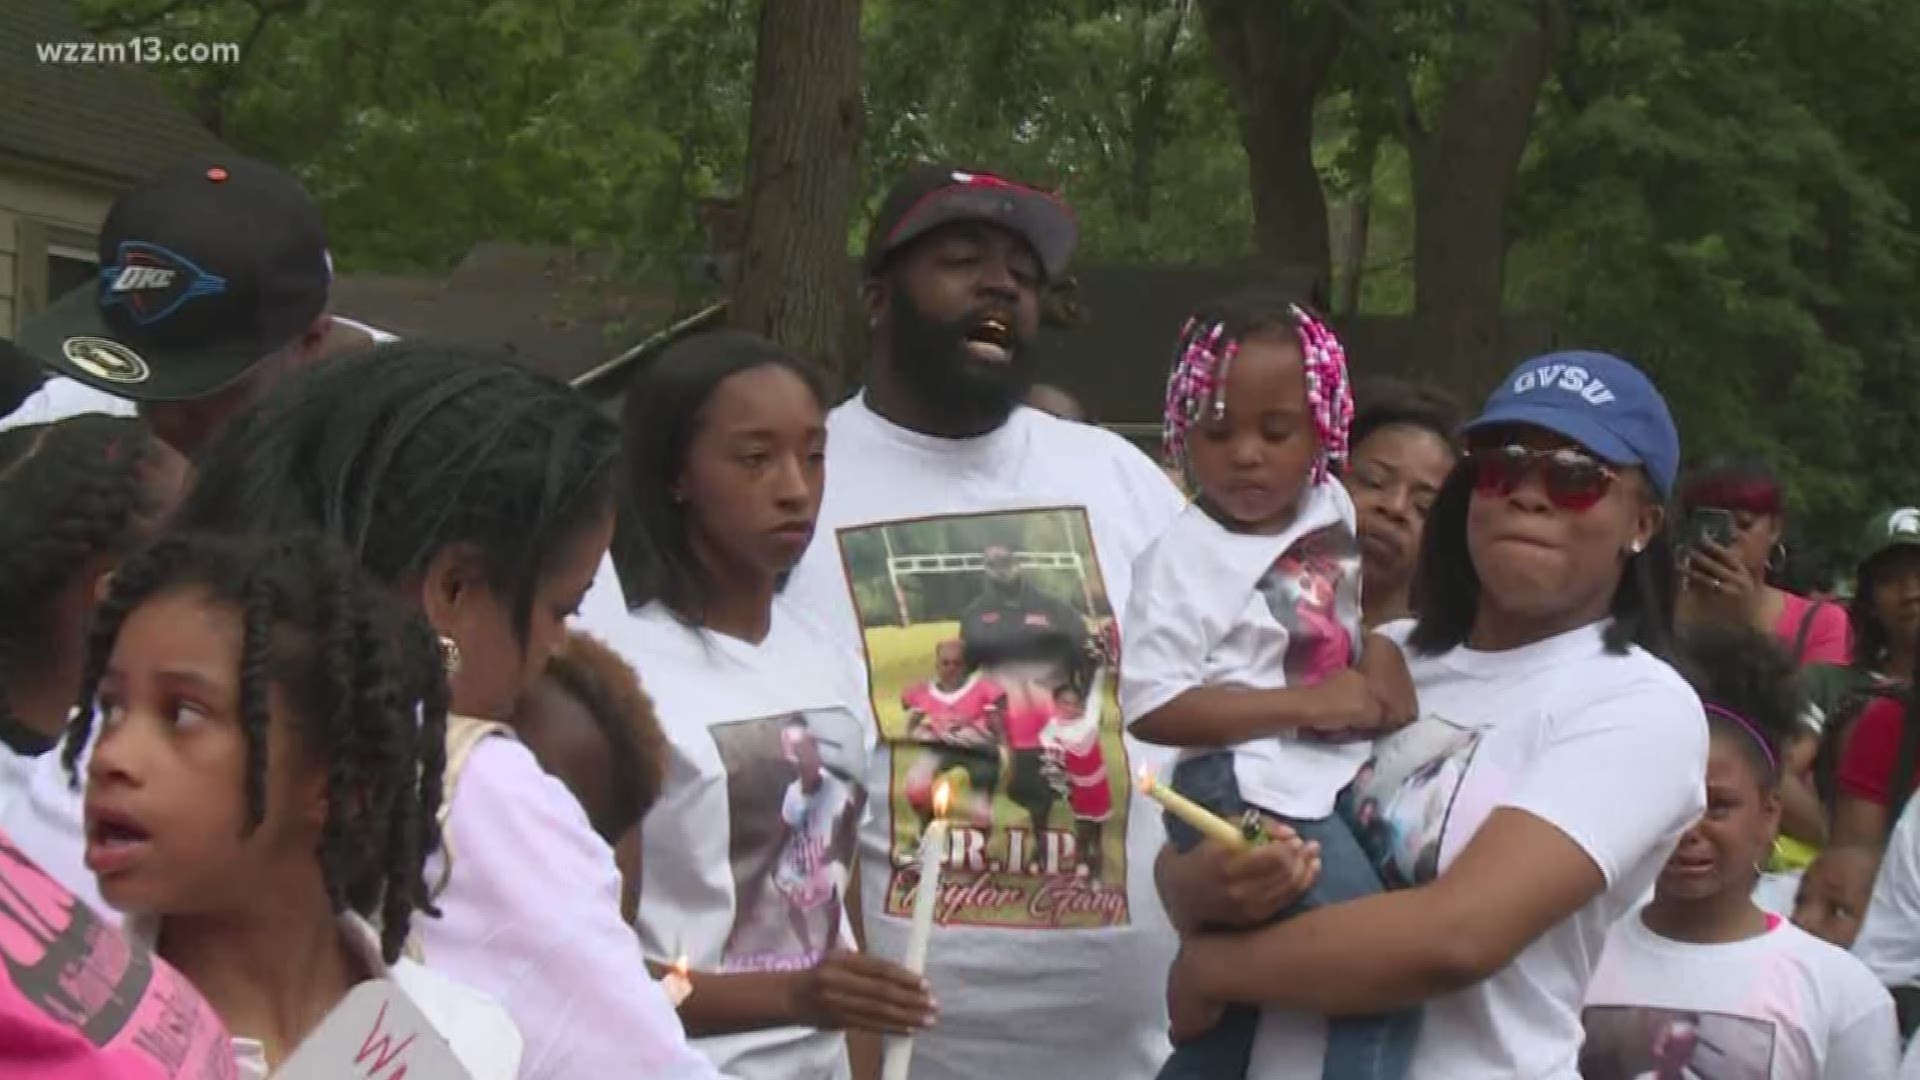 Vigil held for 6-year-old killed in hit-and-run